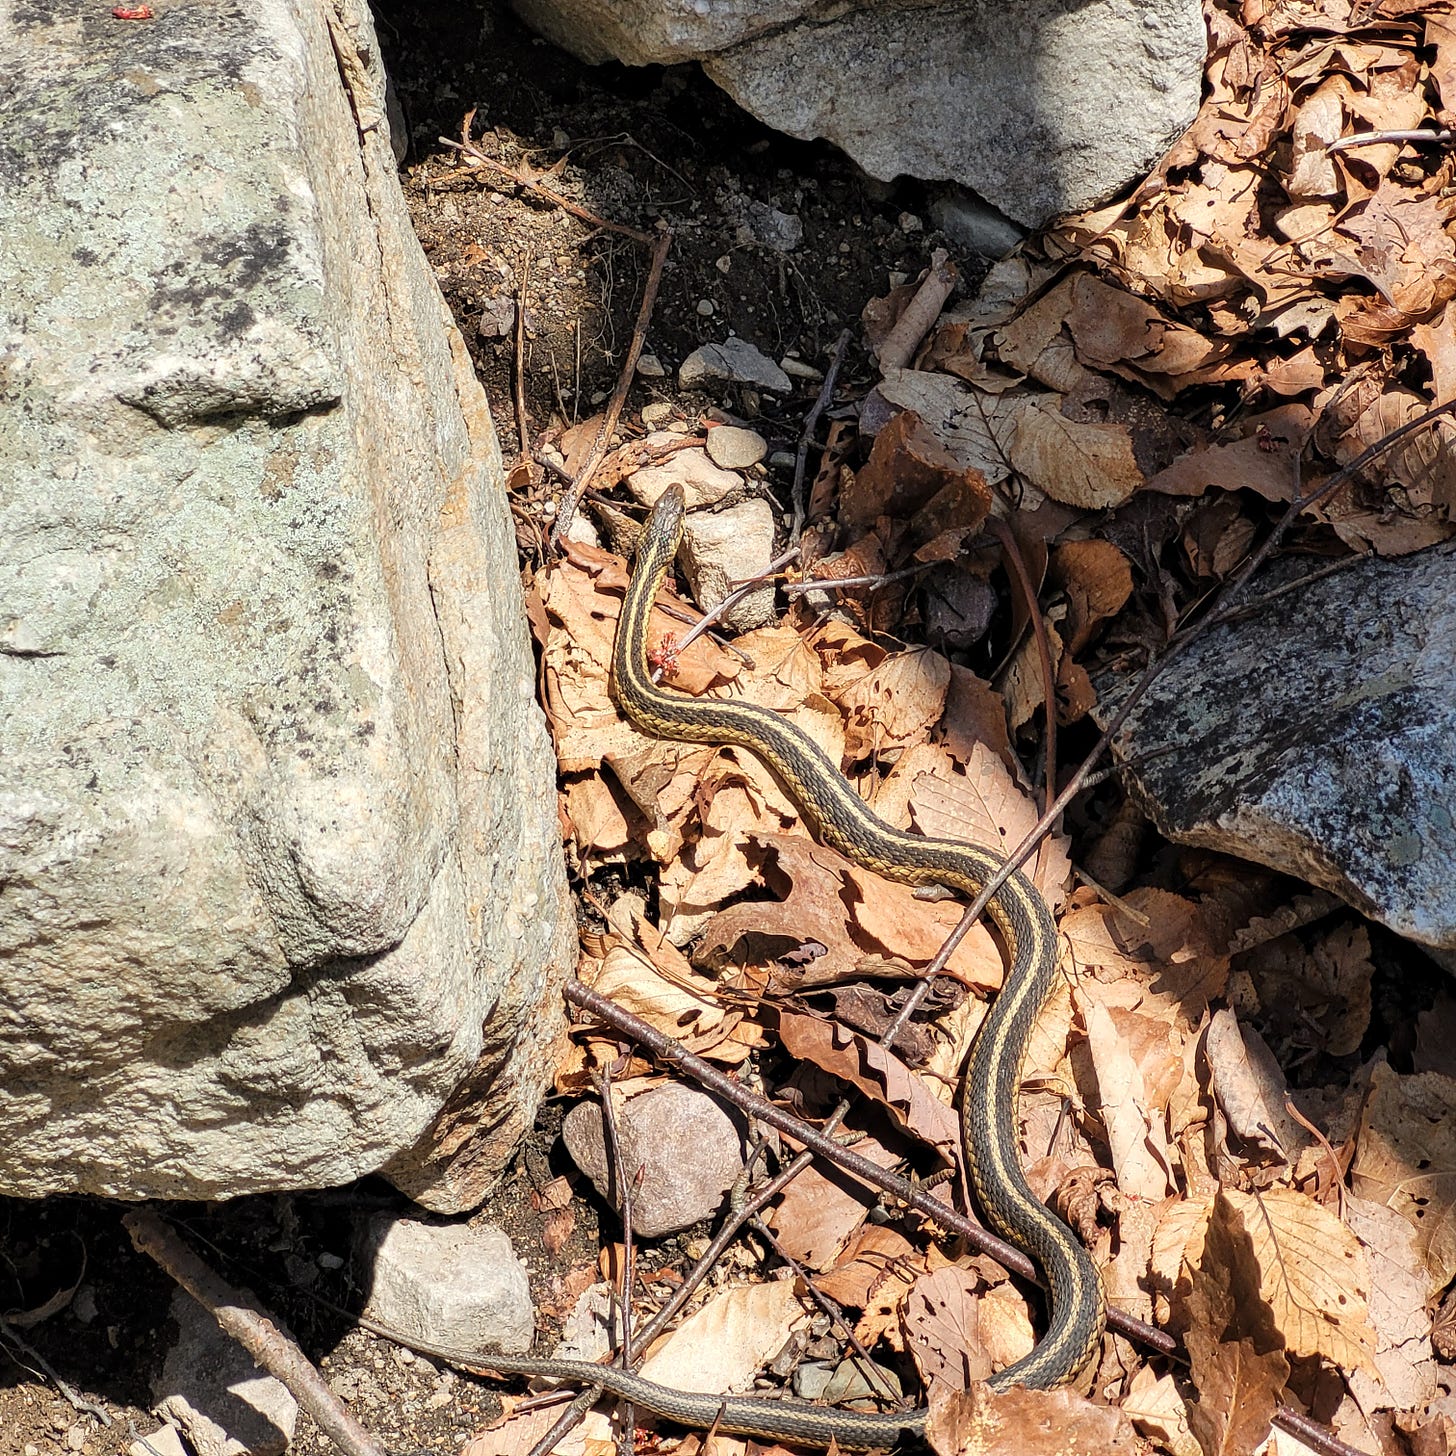 snake at the Gunks in upstate New York